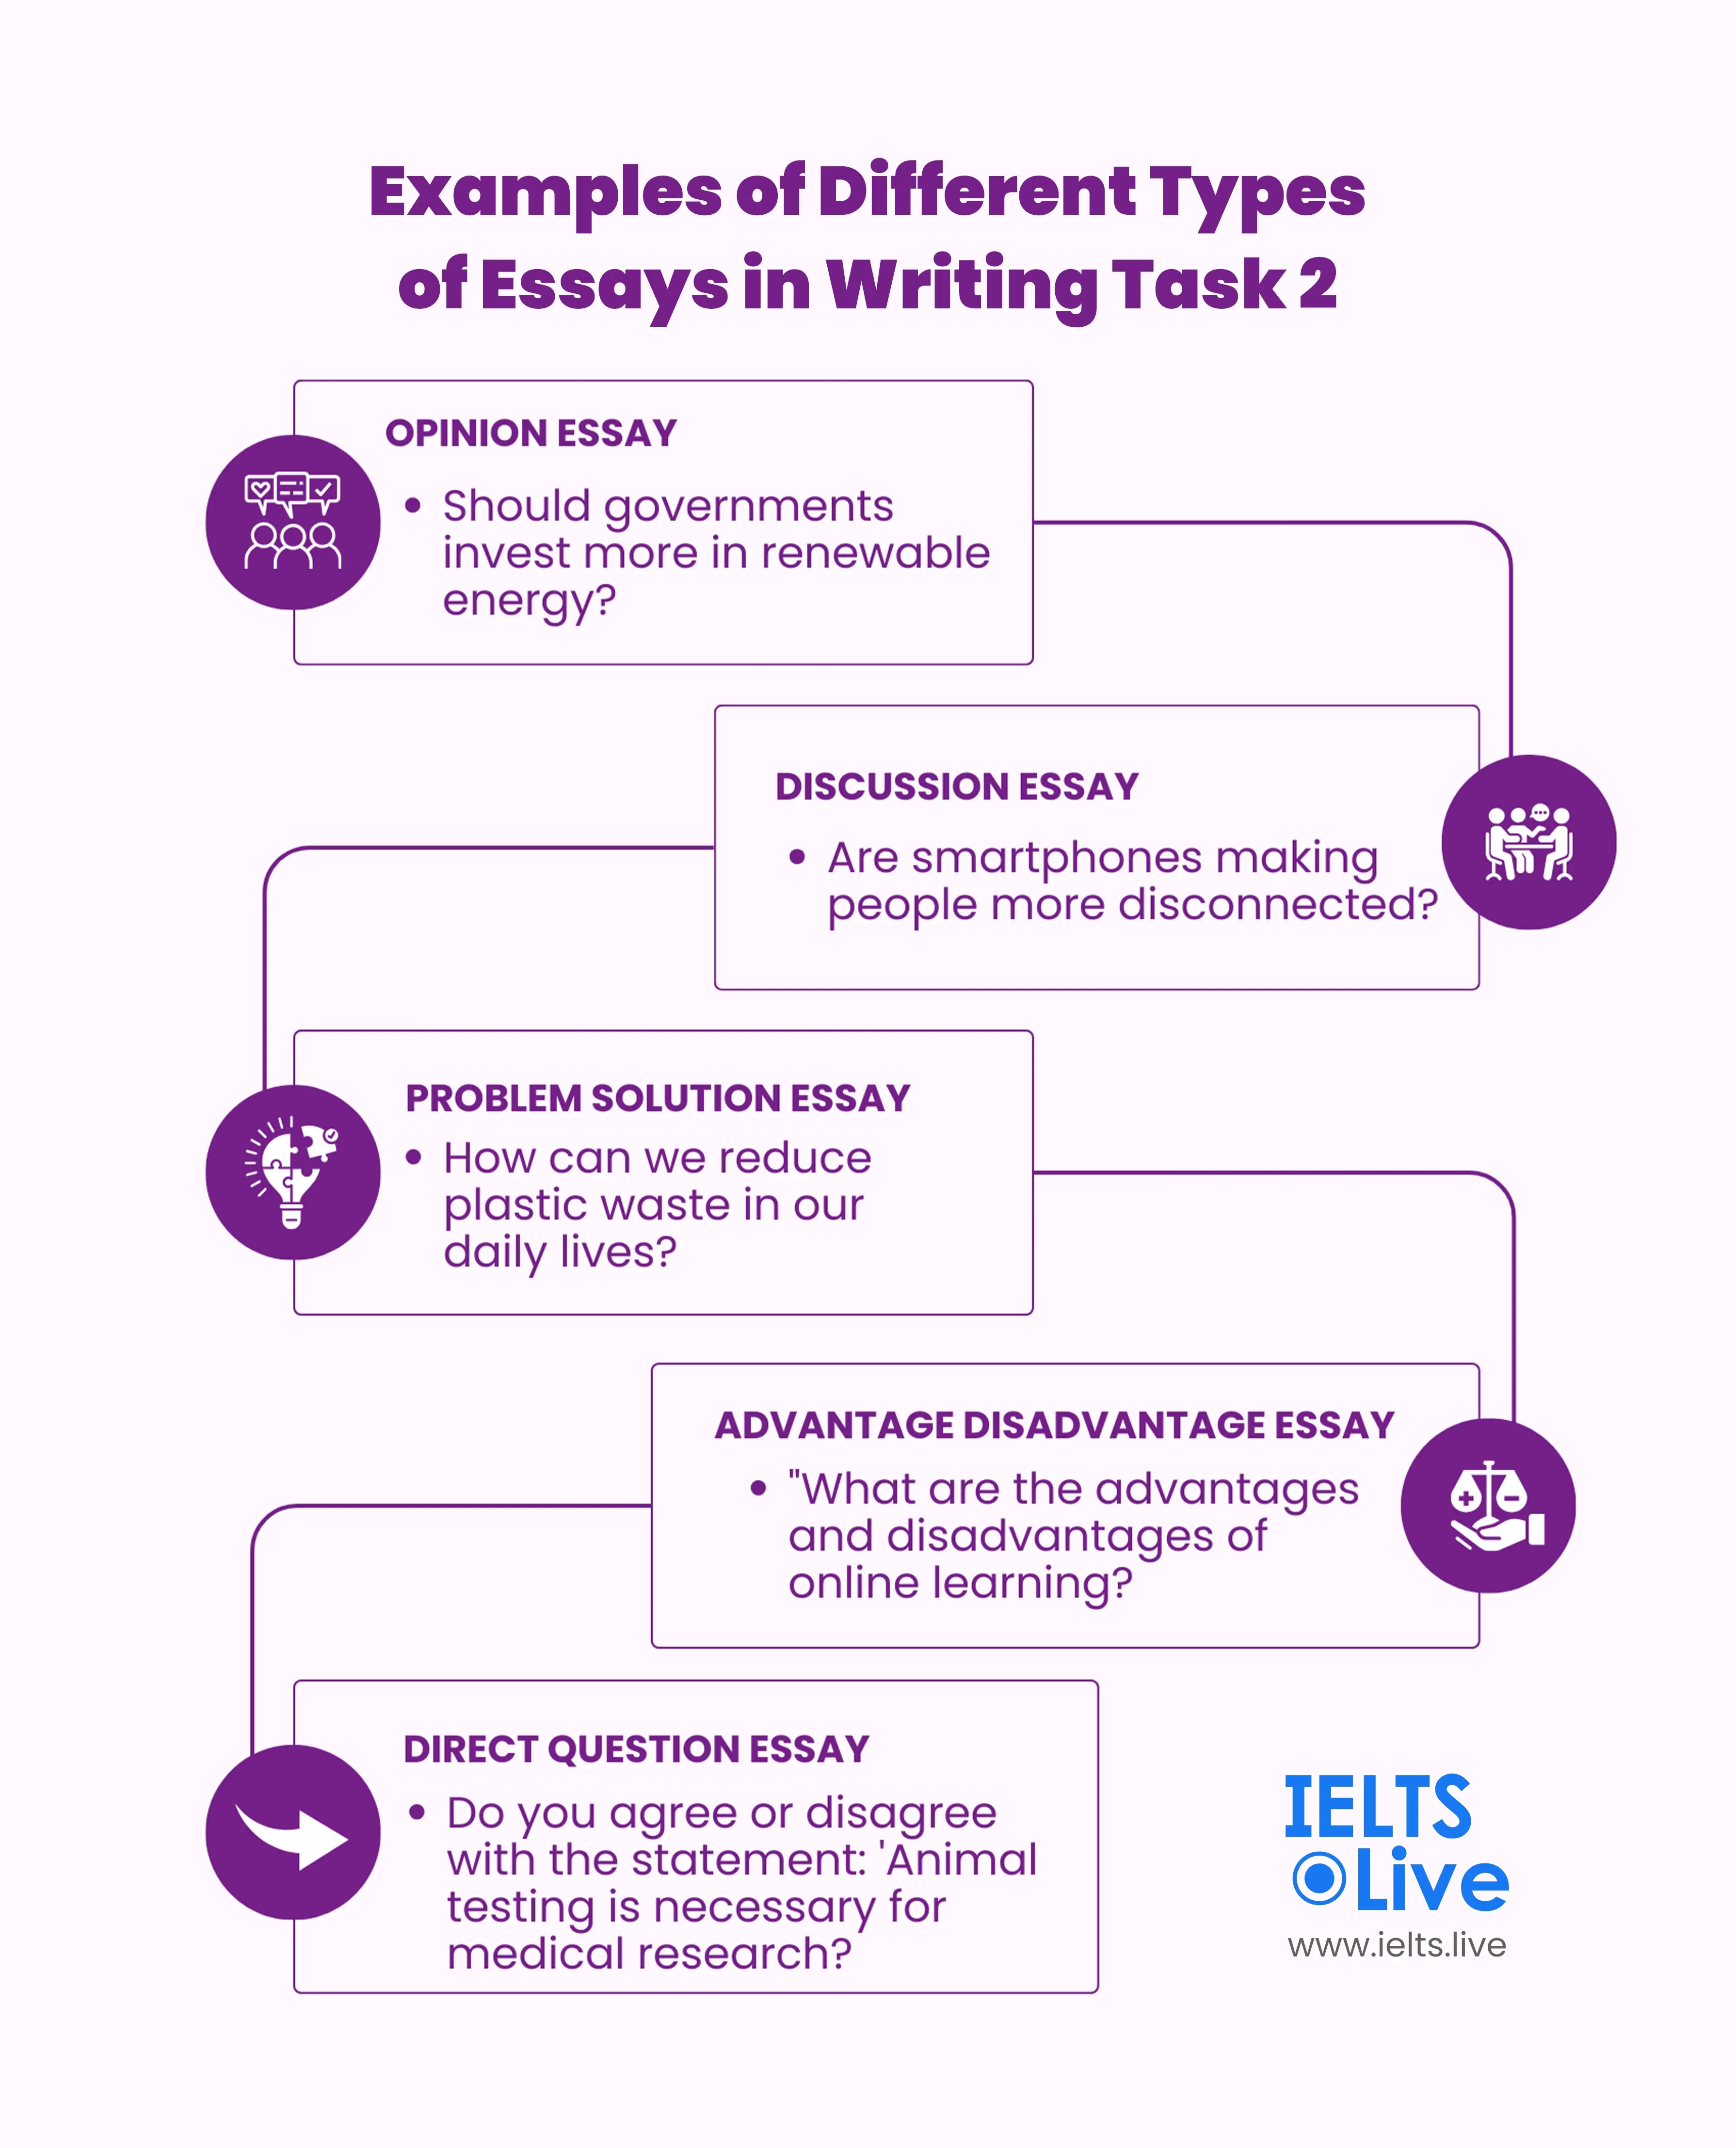 Different Types of Essays in IELTS Writing Task 2